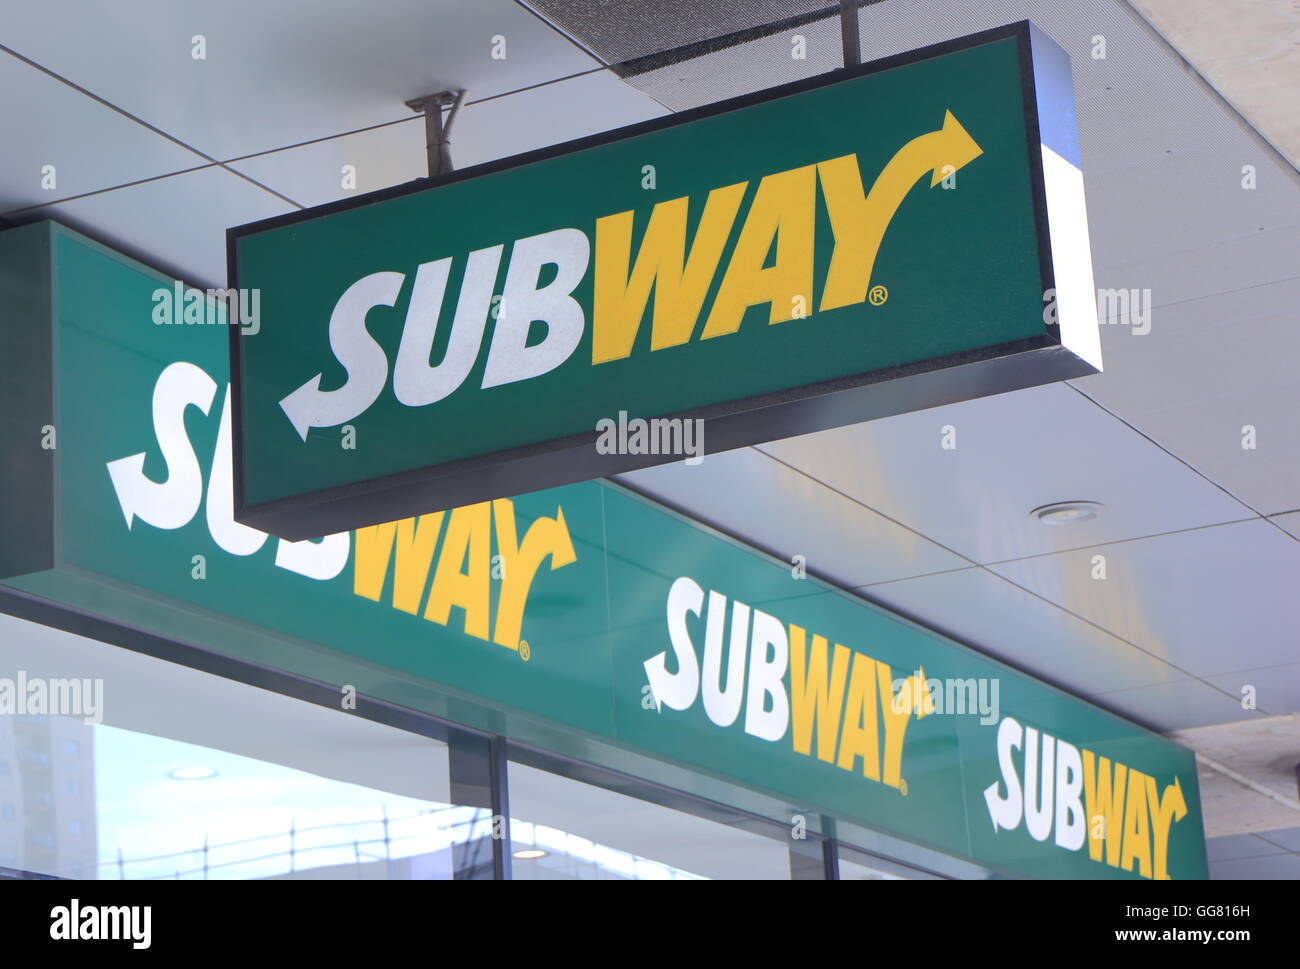 SUBWAY company logo American fast food restaurant franchise that sells sandwiches operating in more than 100 countries. Stock Photo